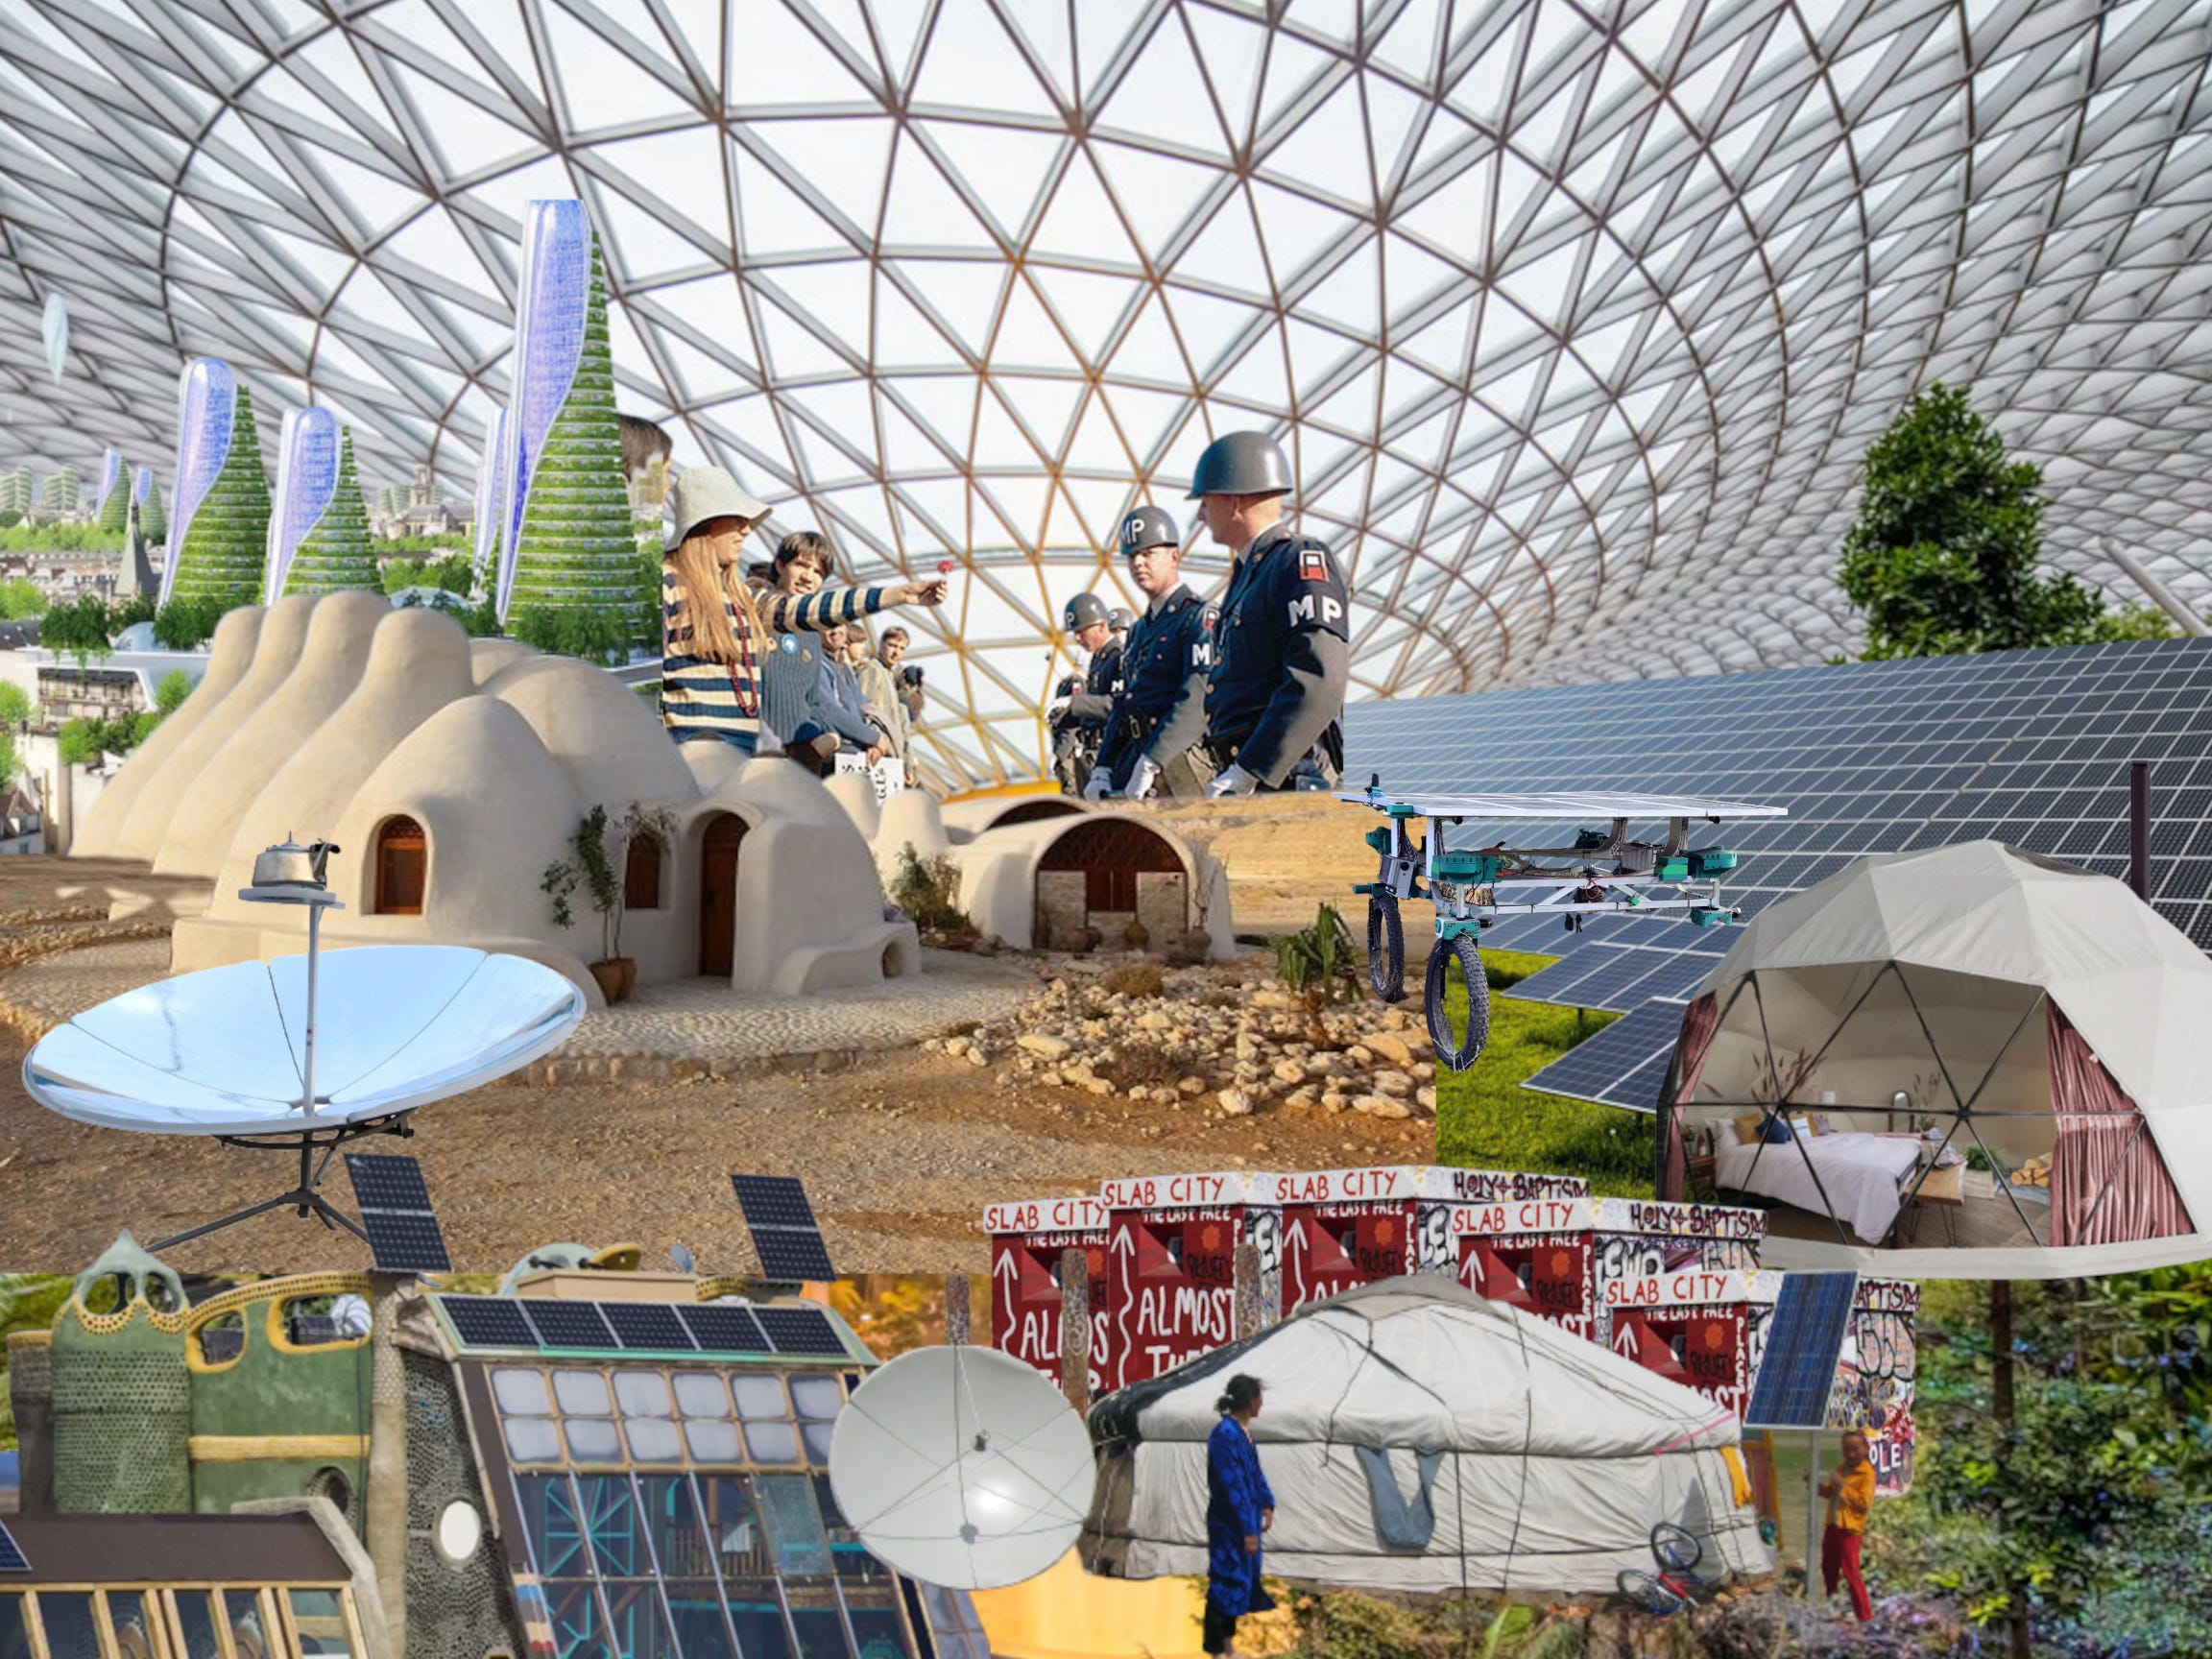 I believe solarpunk could be a valid and innovative theme in